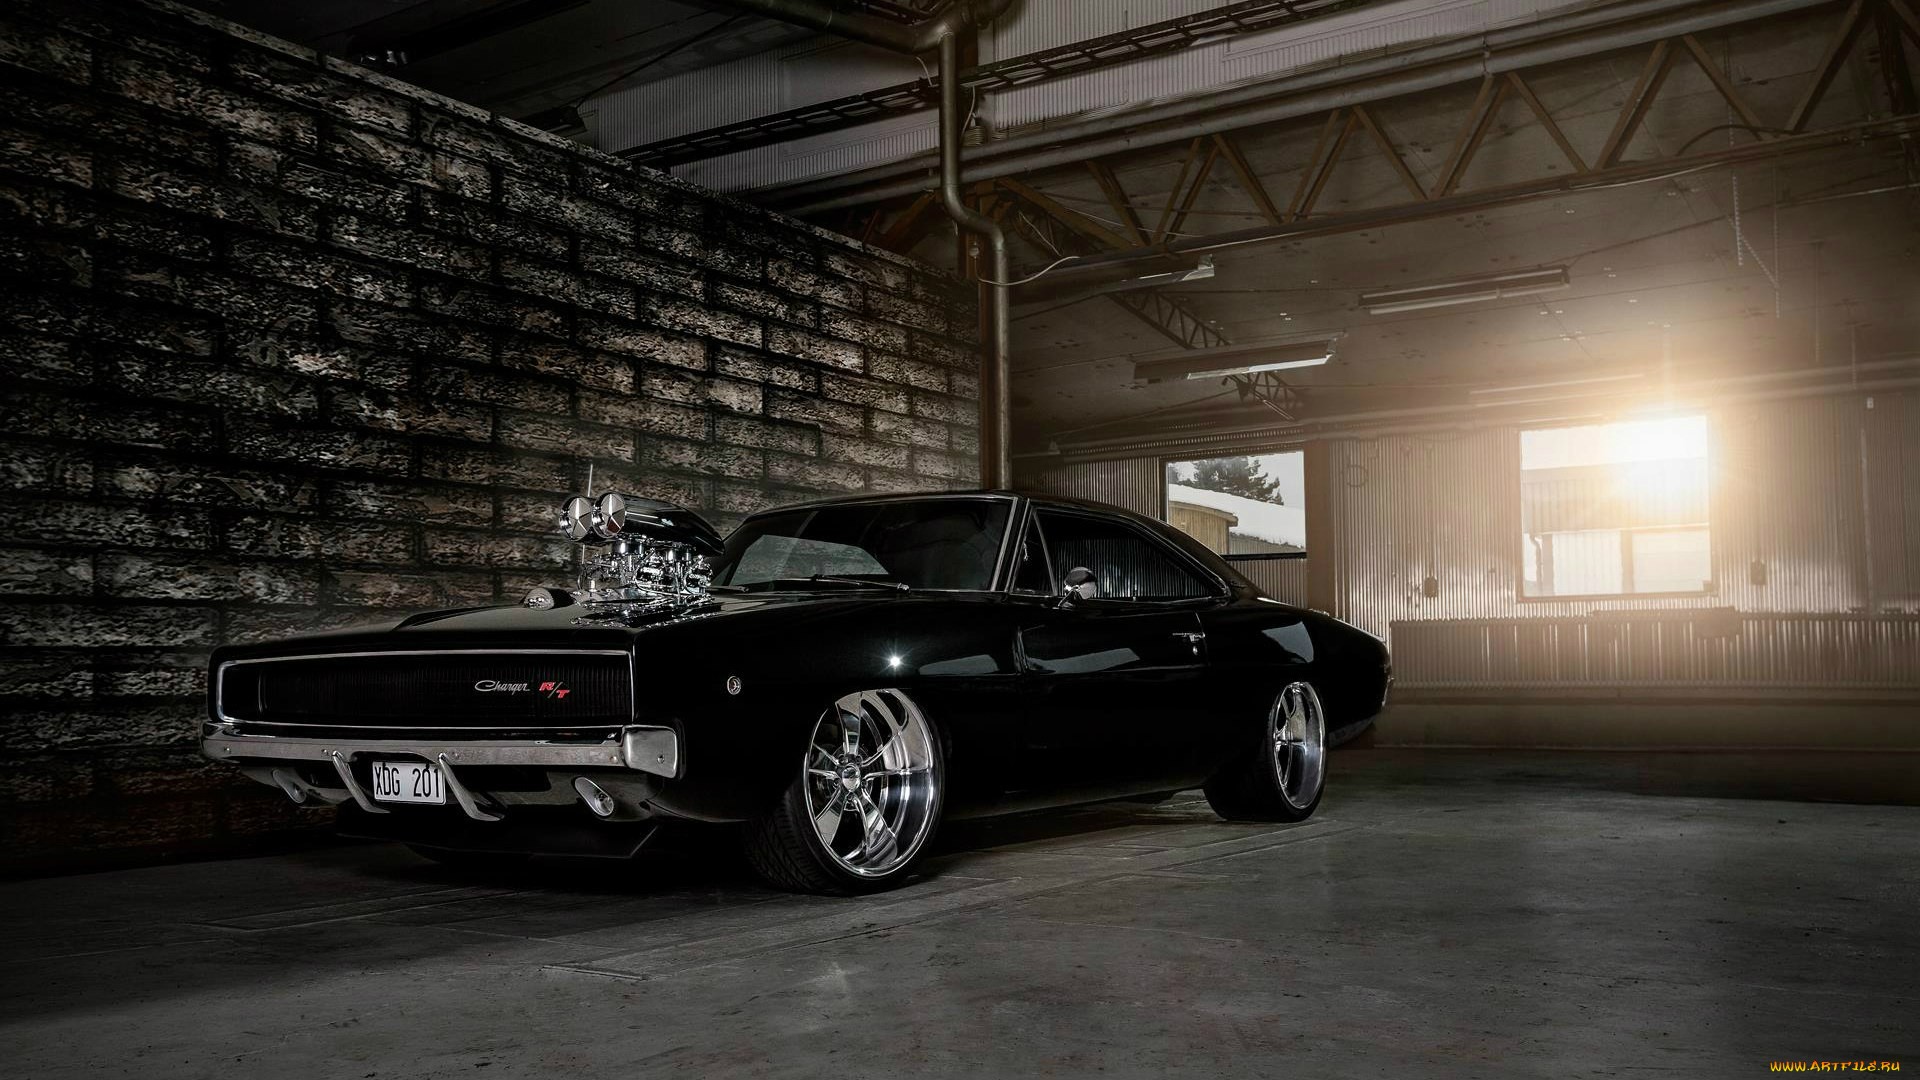 Dodge Charger Rt Wallpaper On